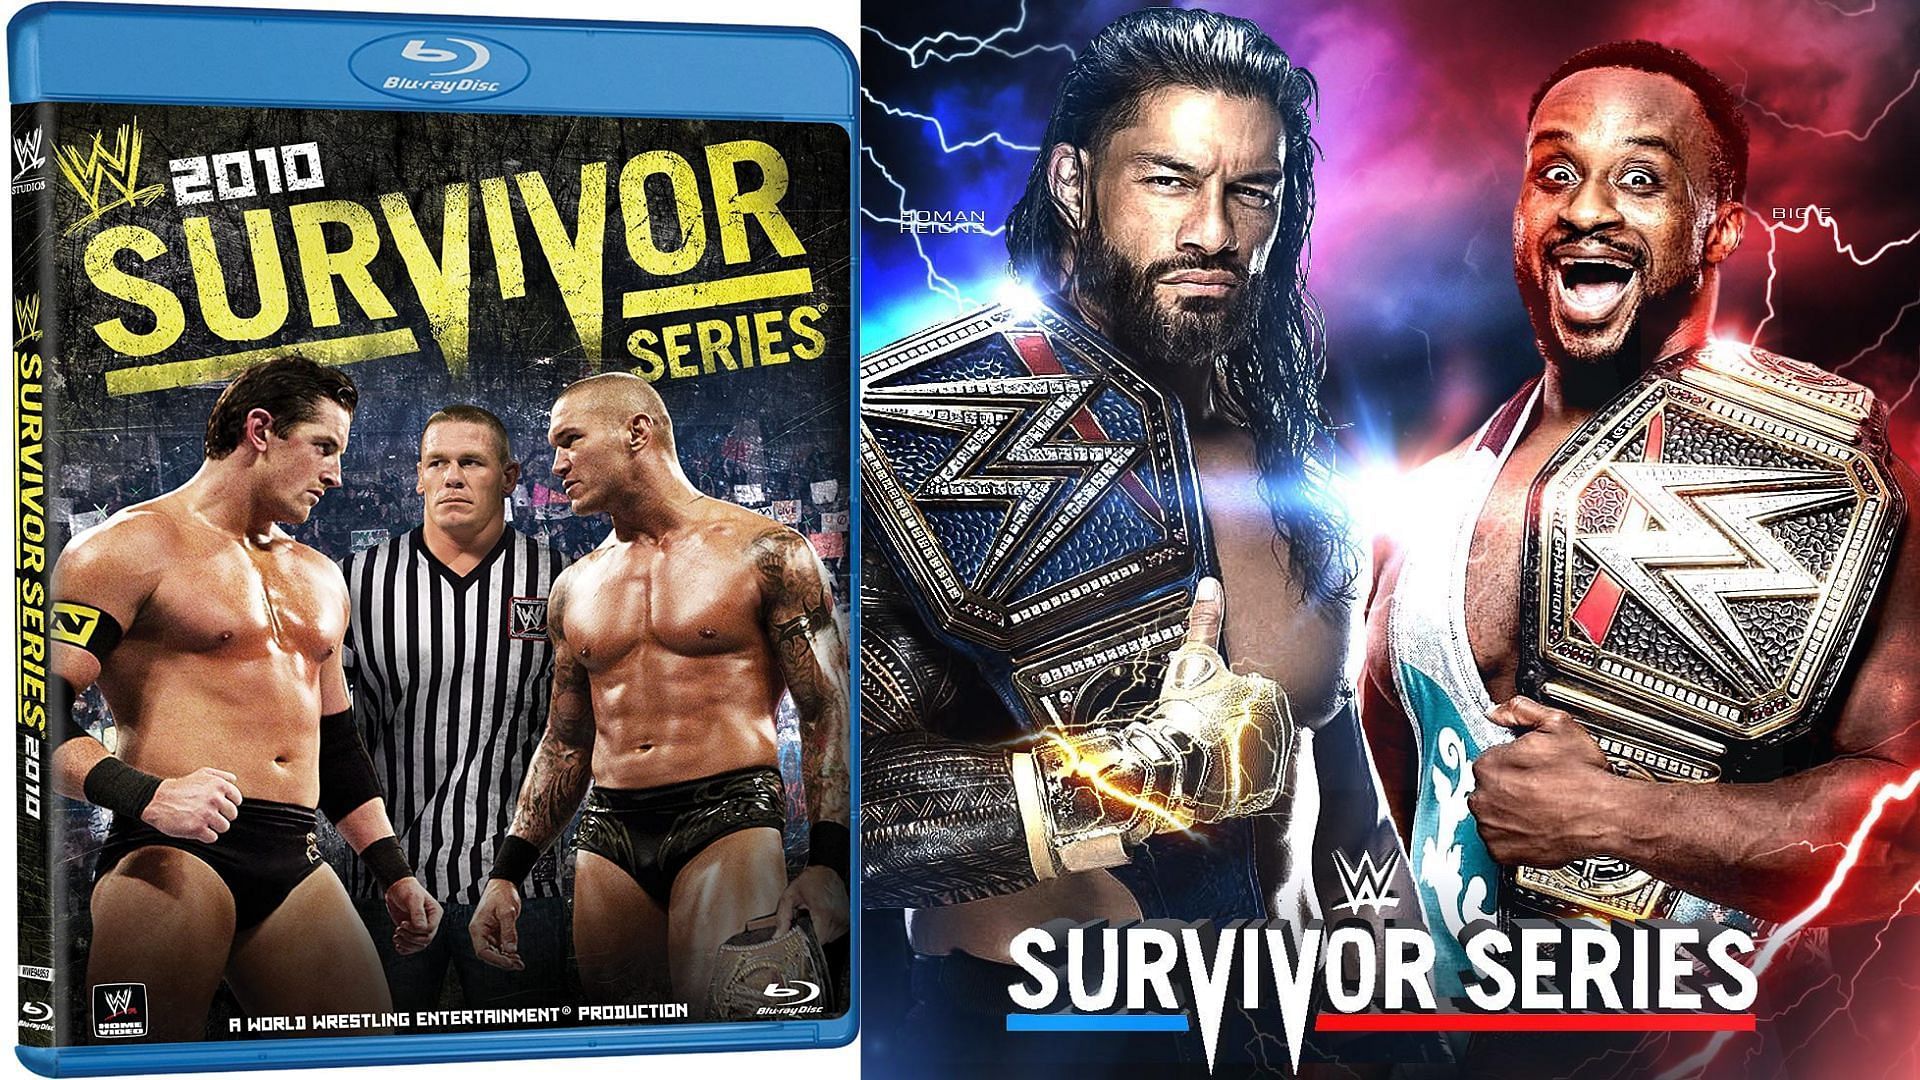 WWE Survivor Series is the second longest-running PPV event in history.